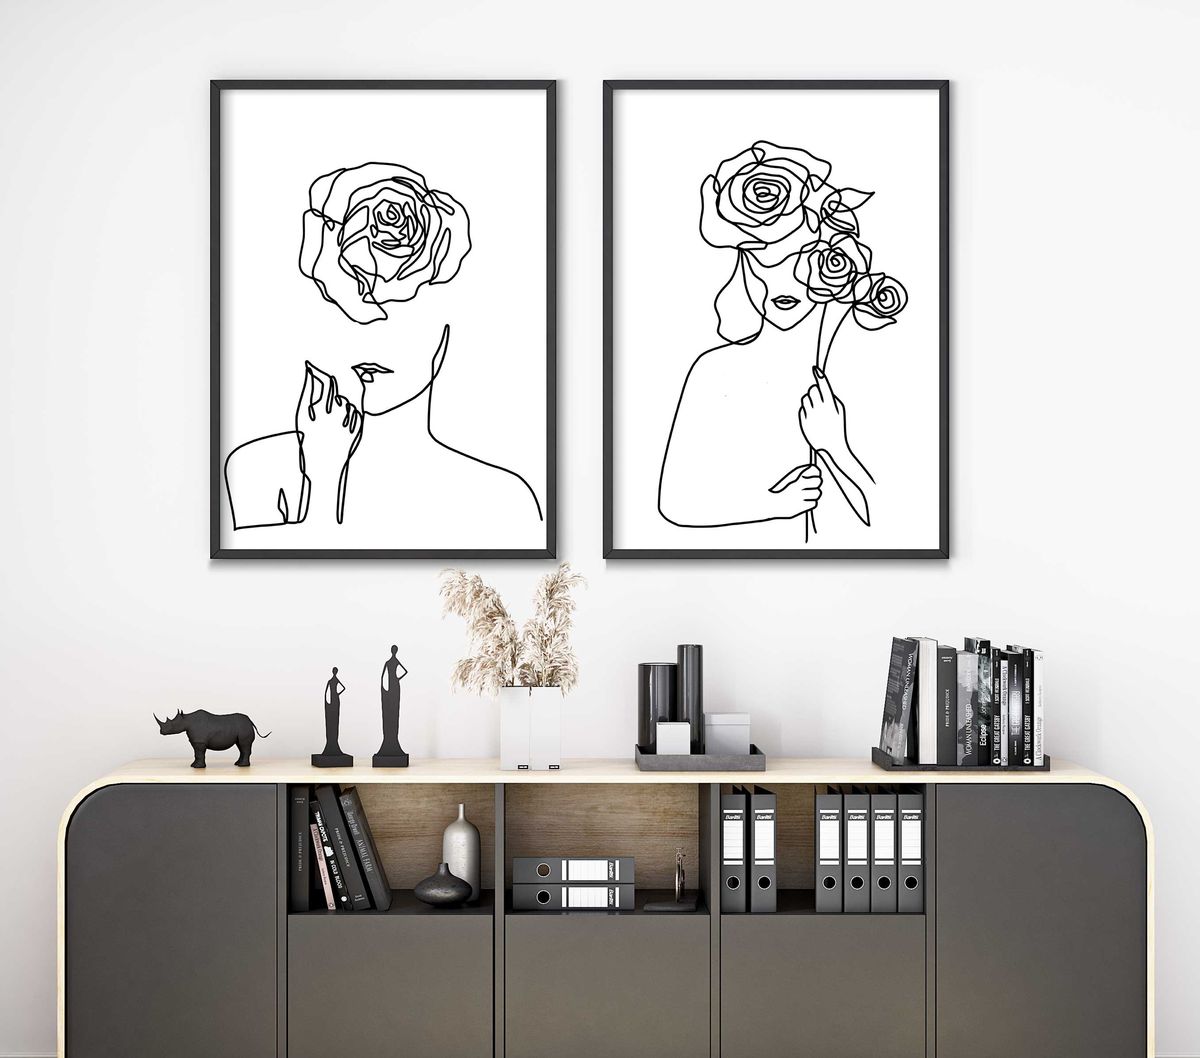 Line Art Faces with Roses A3 - Unframed